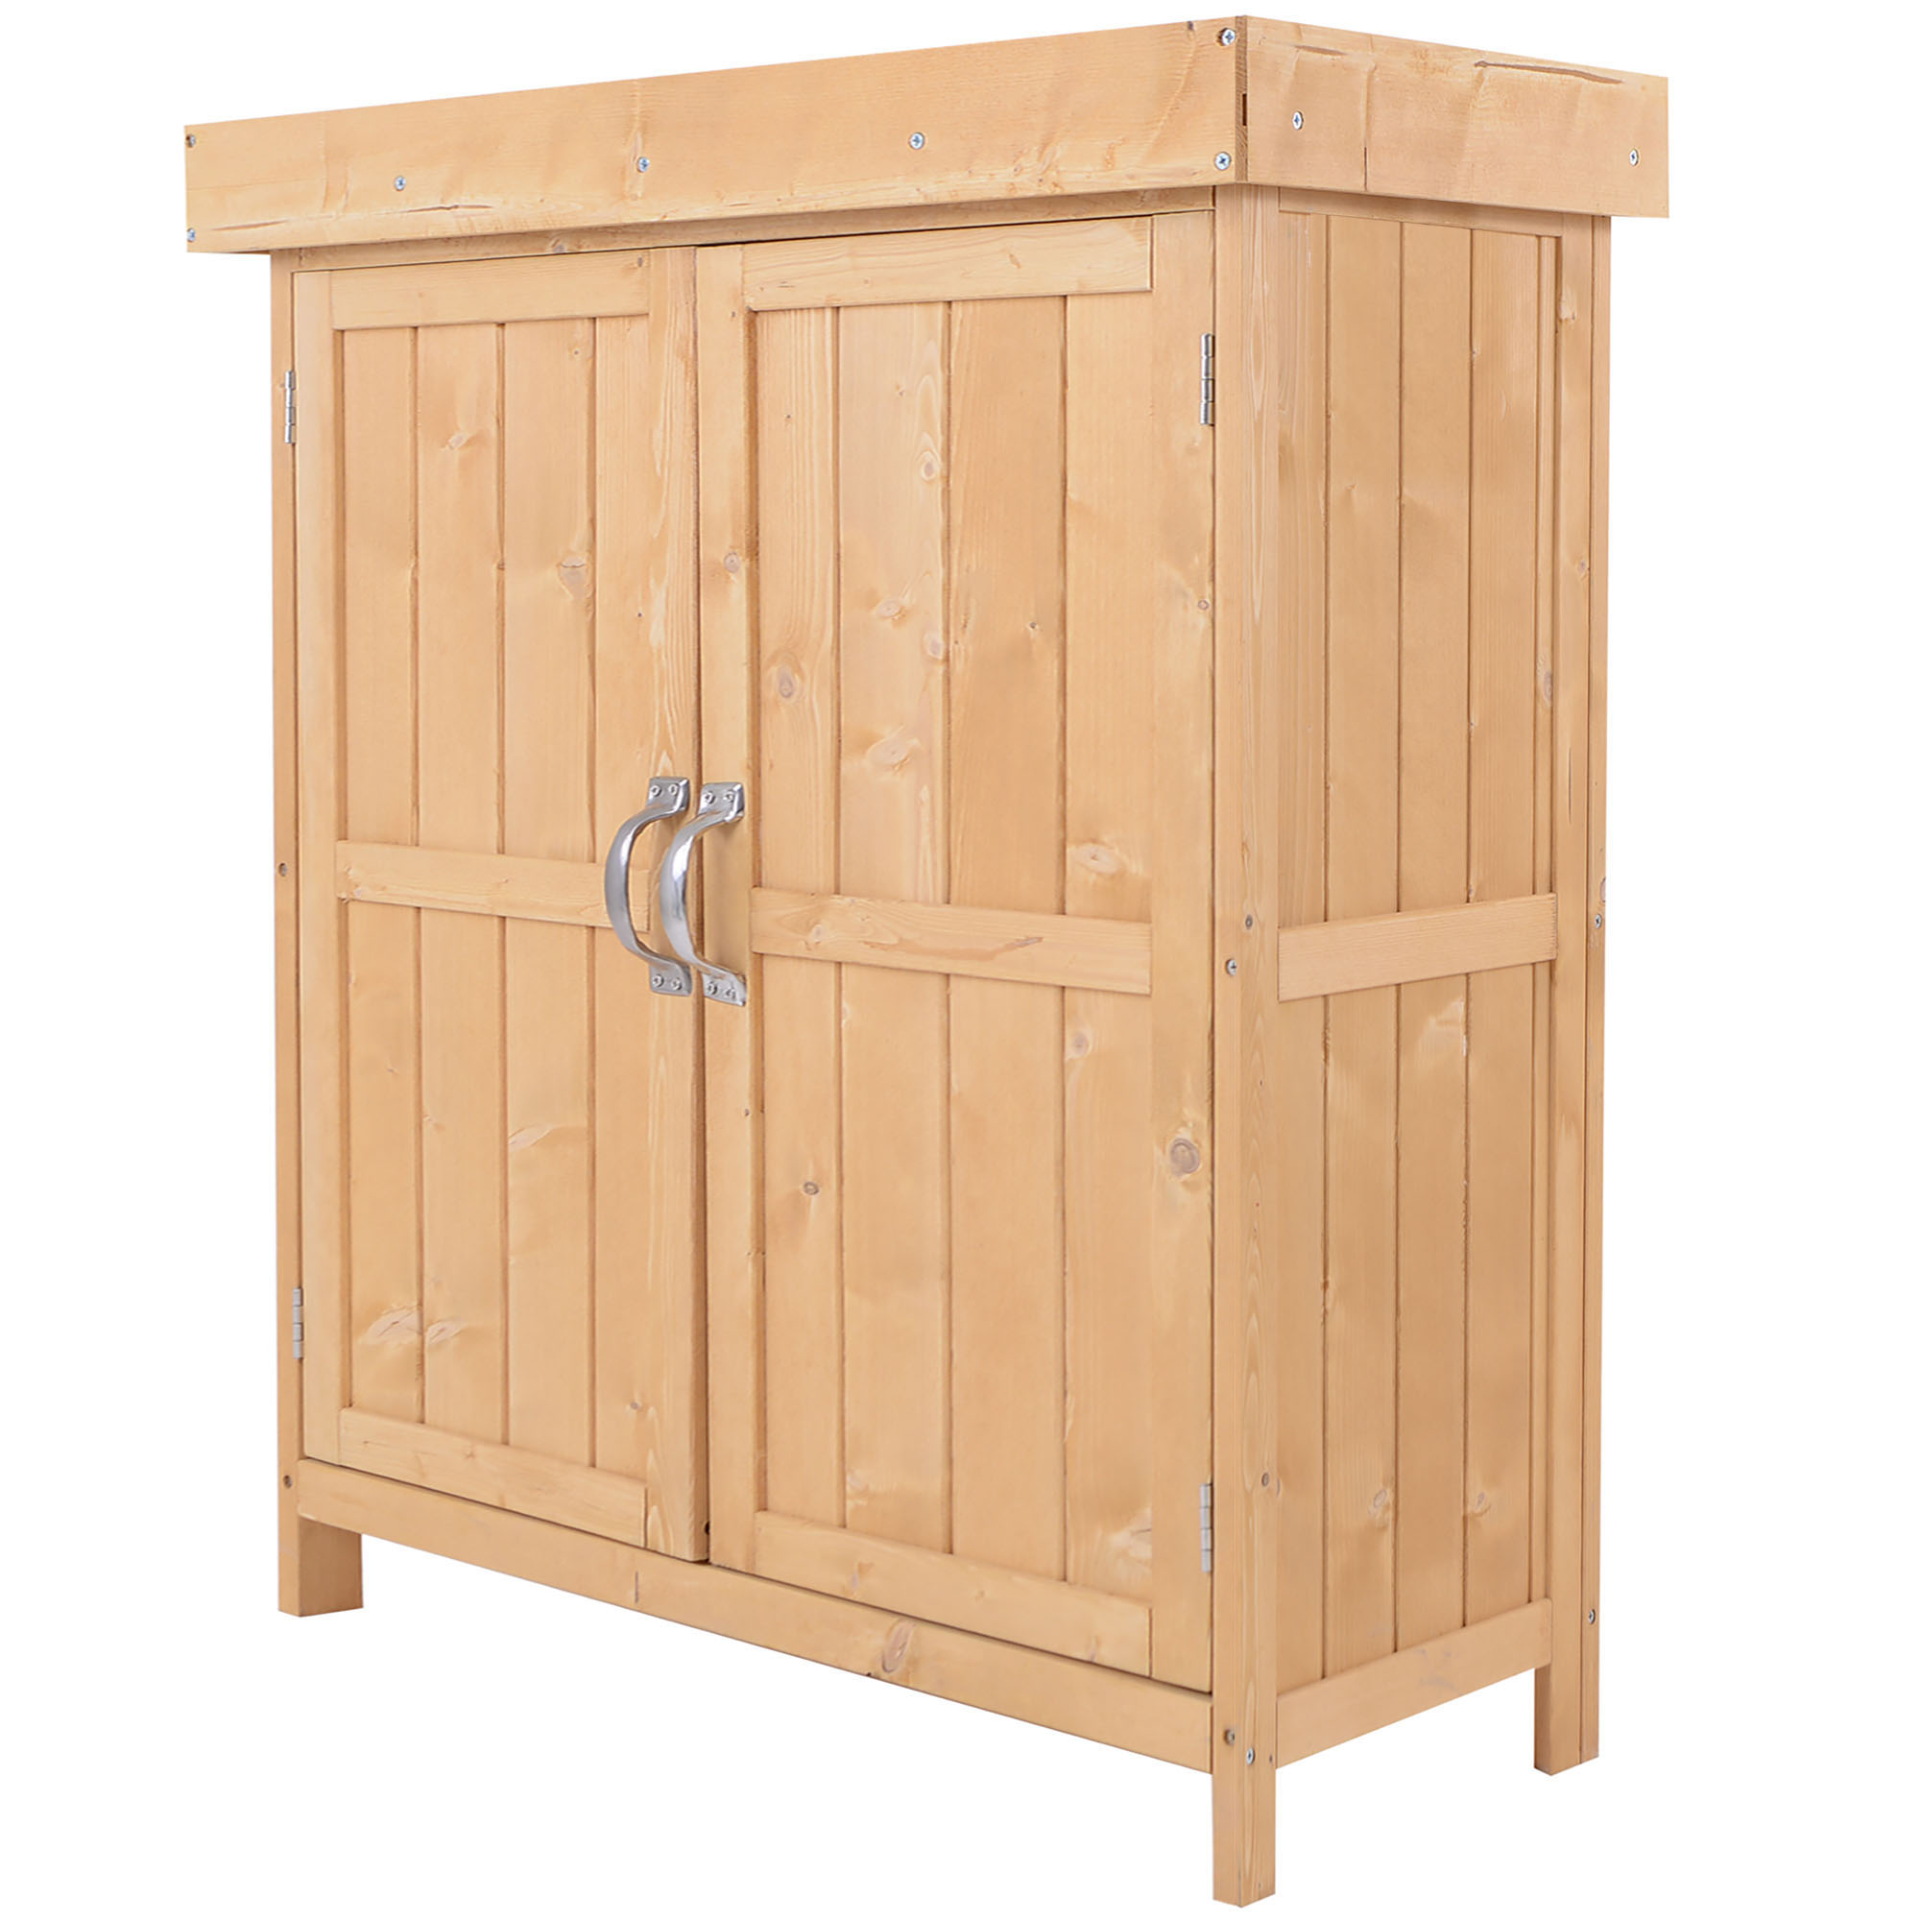 Outsunny Garden Shed Outdoor Garden Storage Shed Wooden Chest Double Doors with